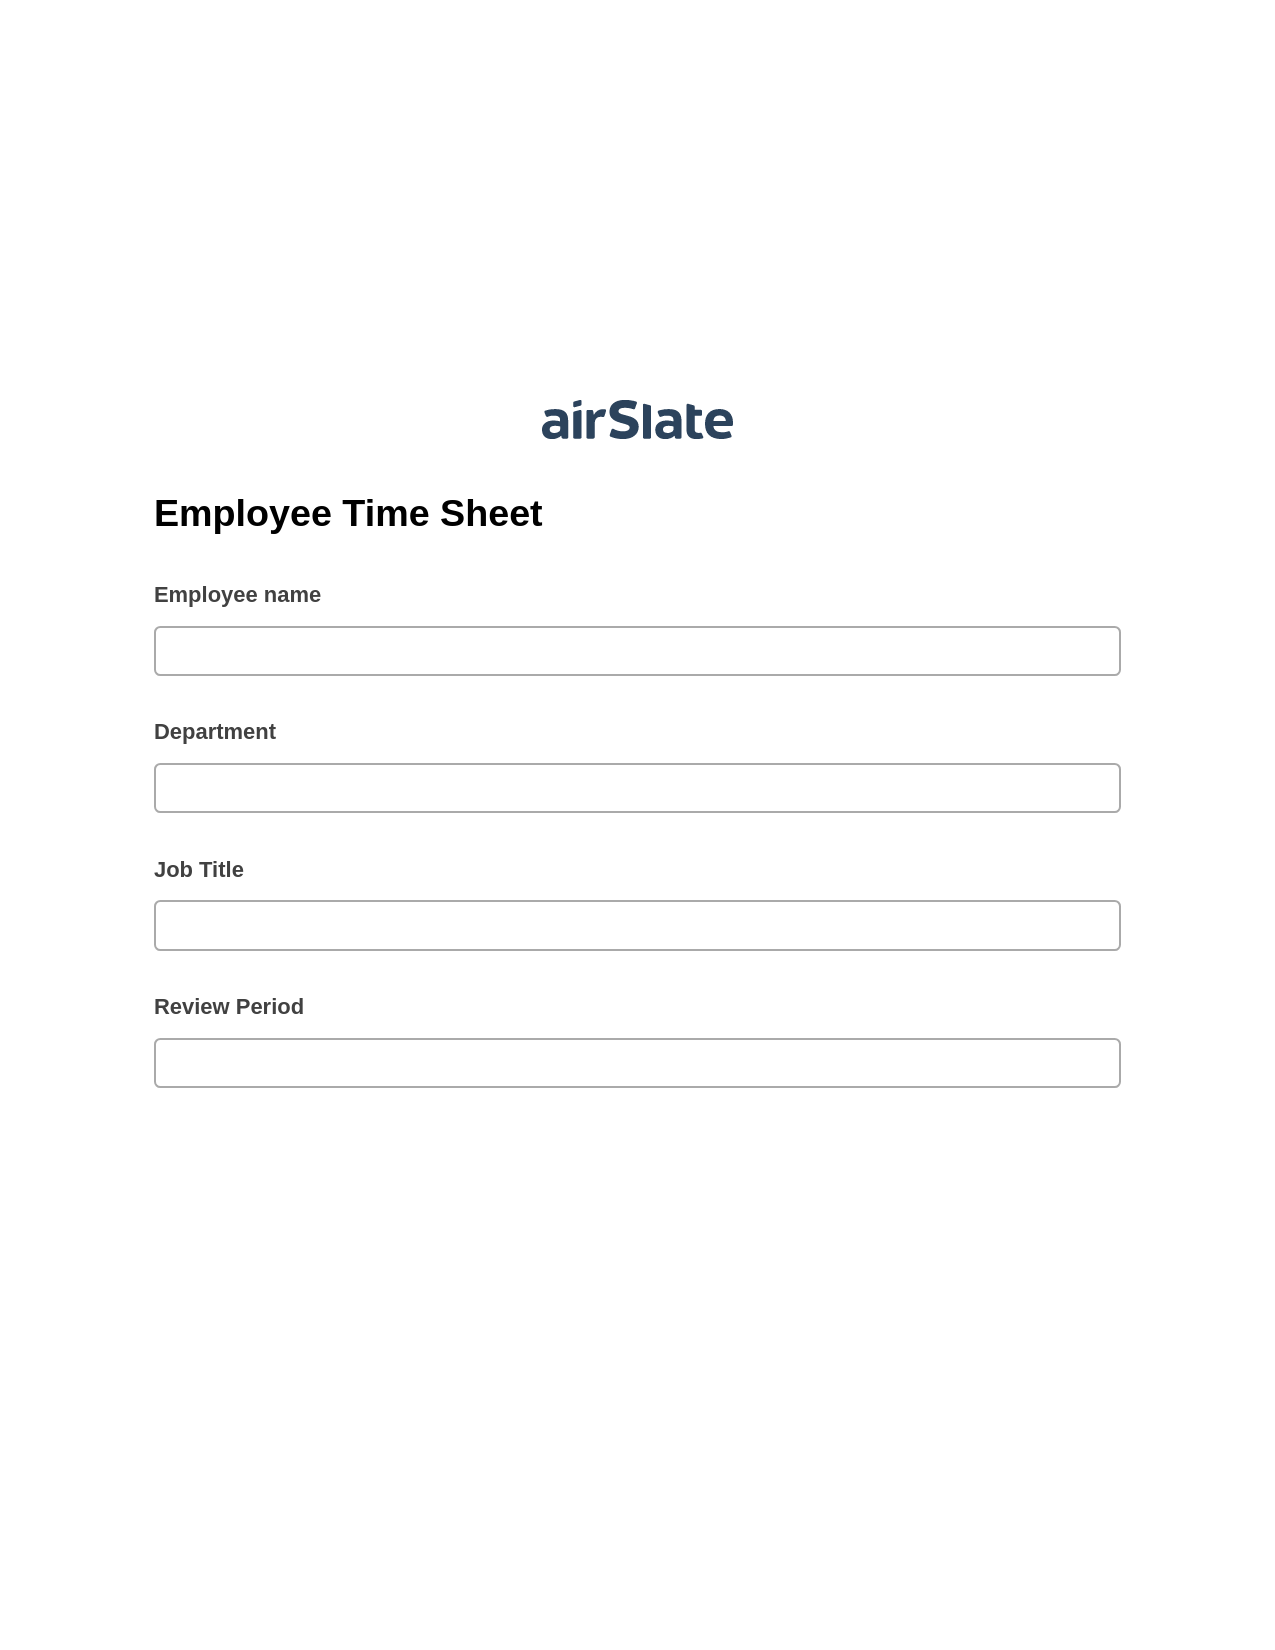 Multirole Employee Time Sheet Pre-fill from Salesforce Records Bot, Add Tags to Slate Bot, Export to WebMerge Bot